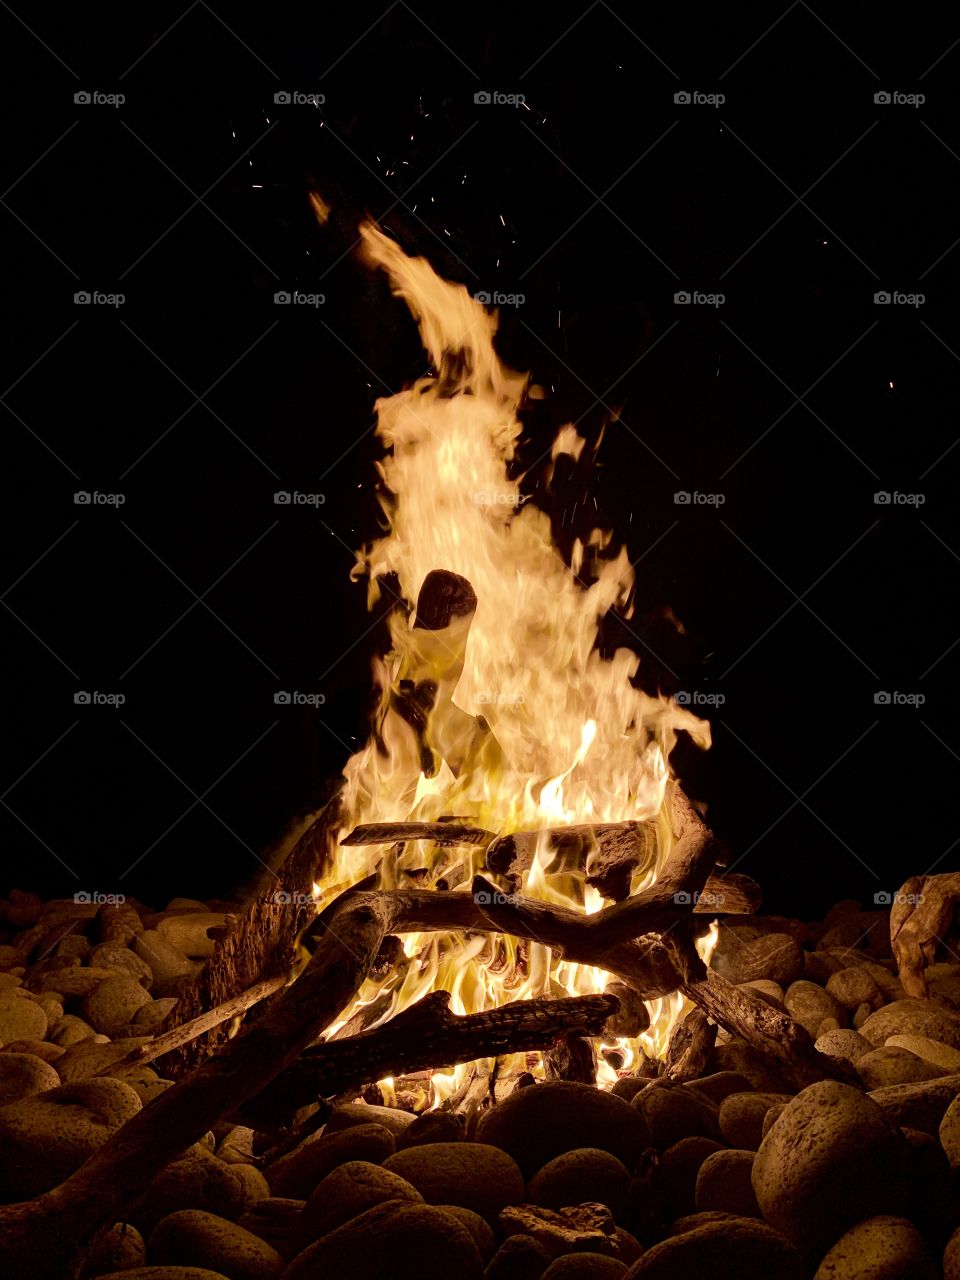 A blistering hot flame sizzling the energy out of the aged drift wood as the smooth stones gathered around explode in applause for it’s firey glory!